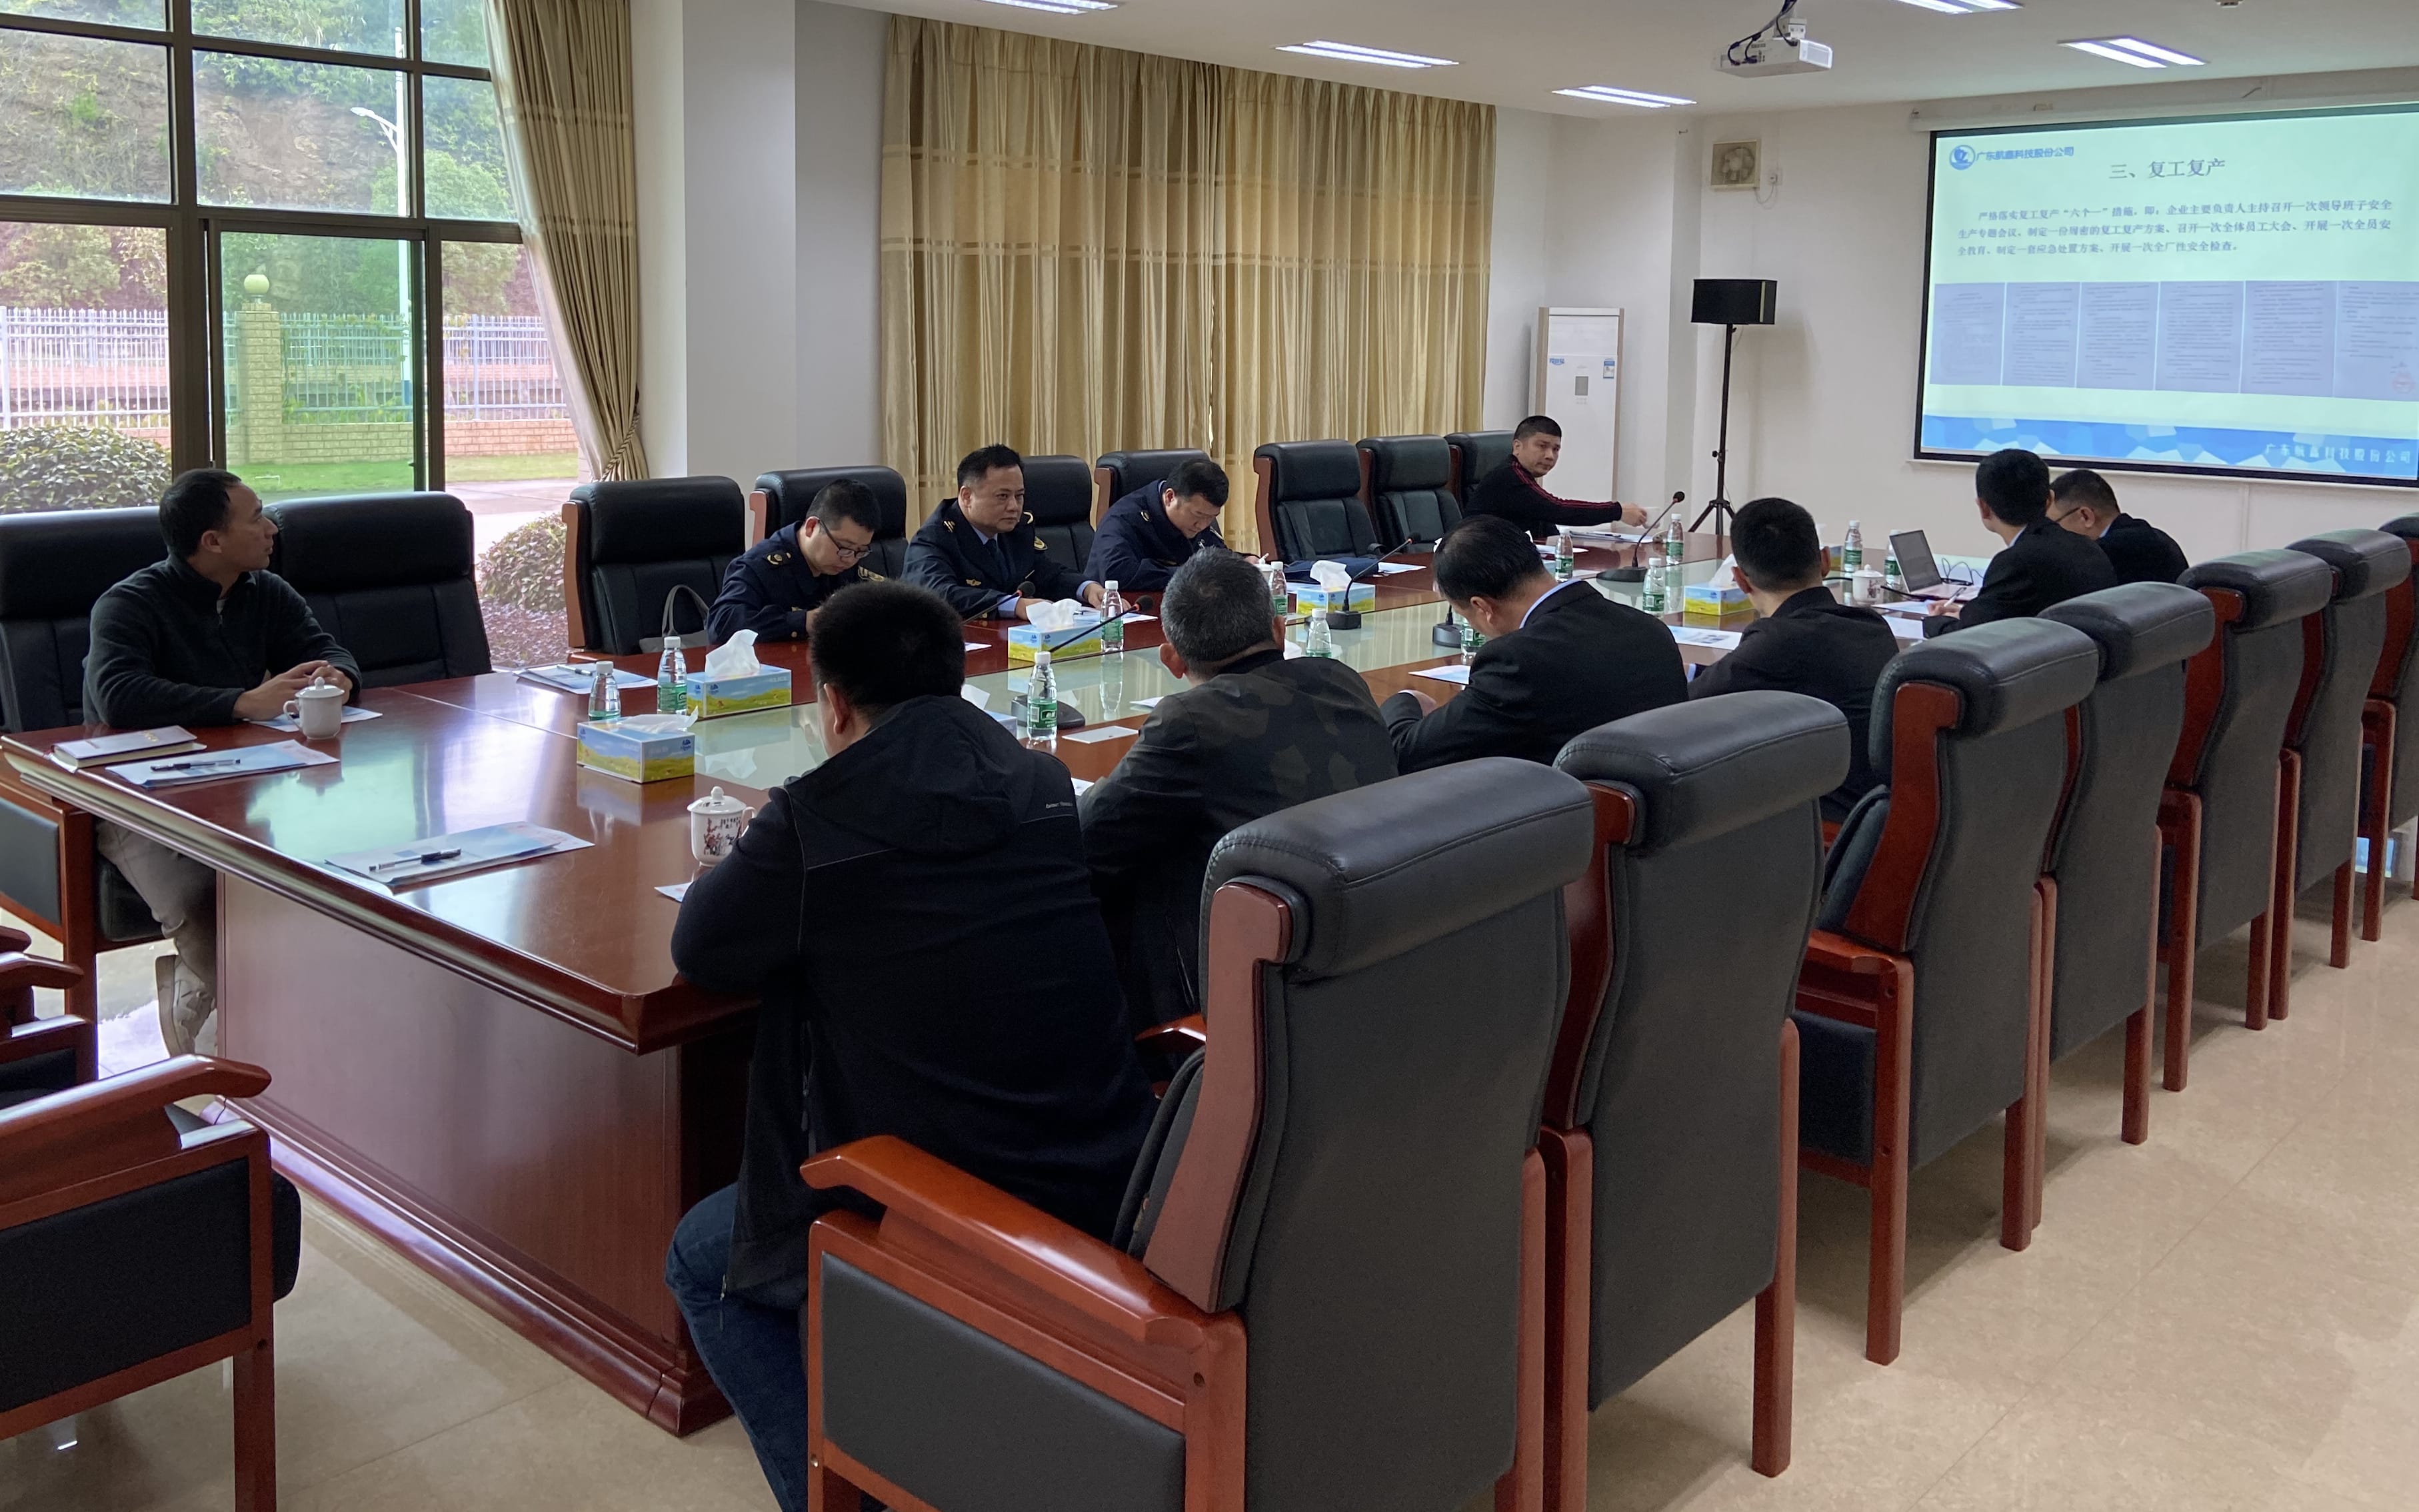 The leadership team of the Meizhou City and Meixian District Emergency Bureau led a team to Hangxin Technology to provide guidance services for production safety during the resumption of work and prod